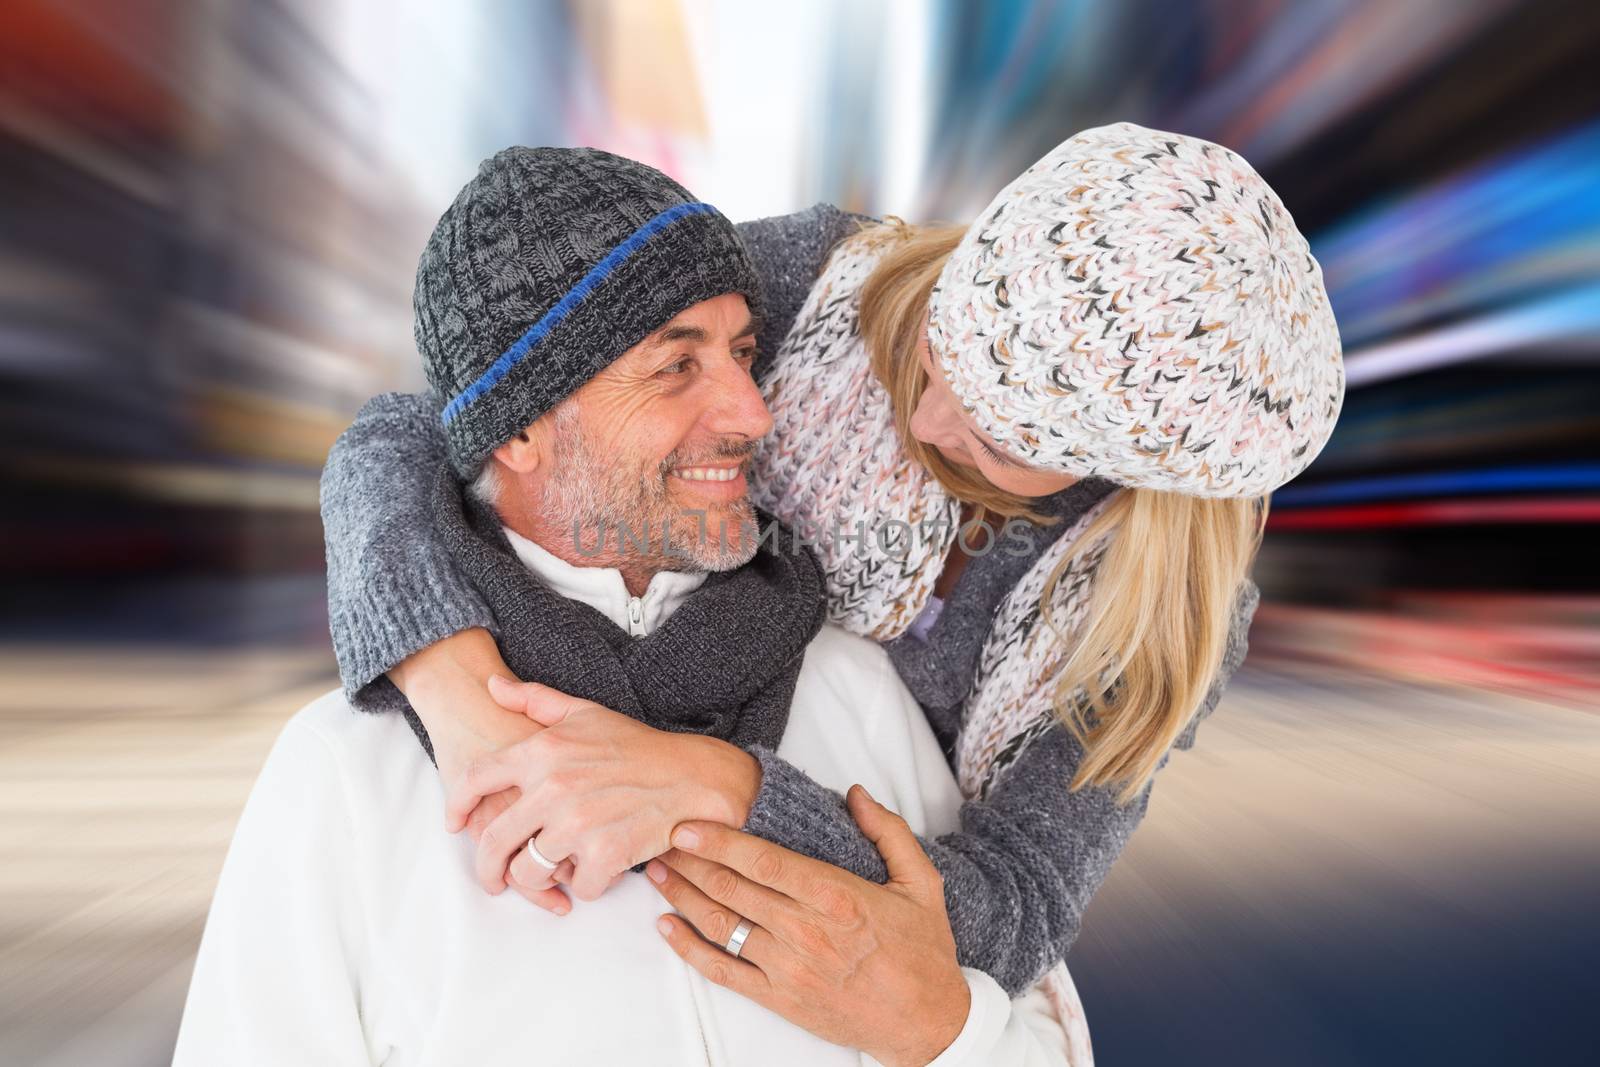 Happy couple in winter fashion embracing against blurry new york street